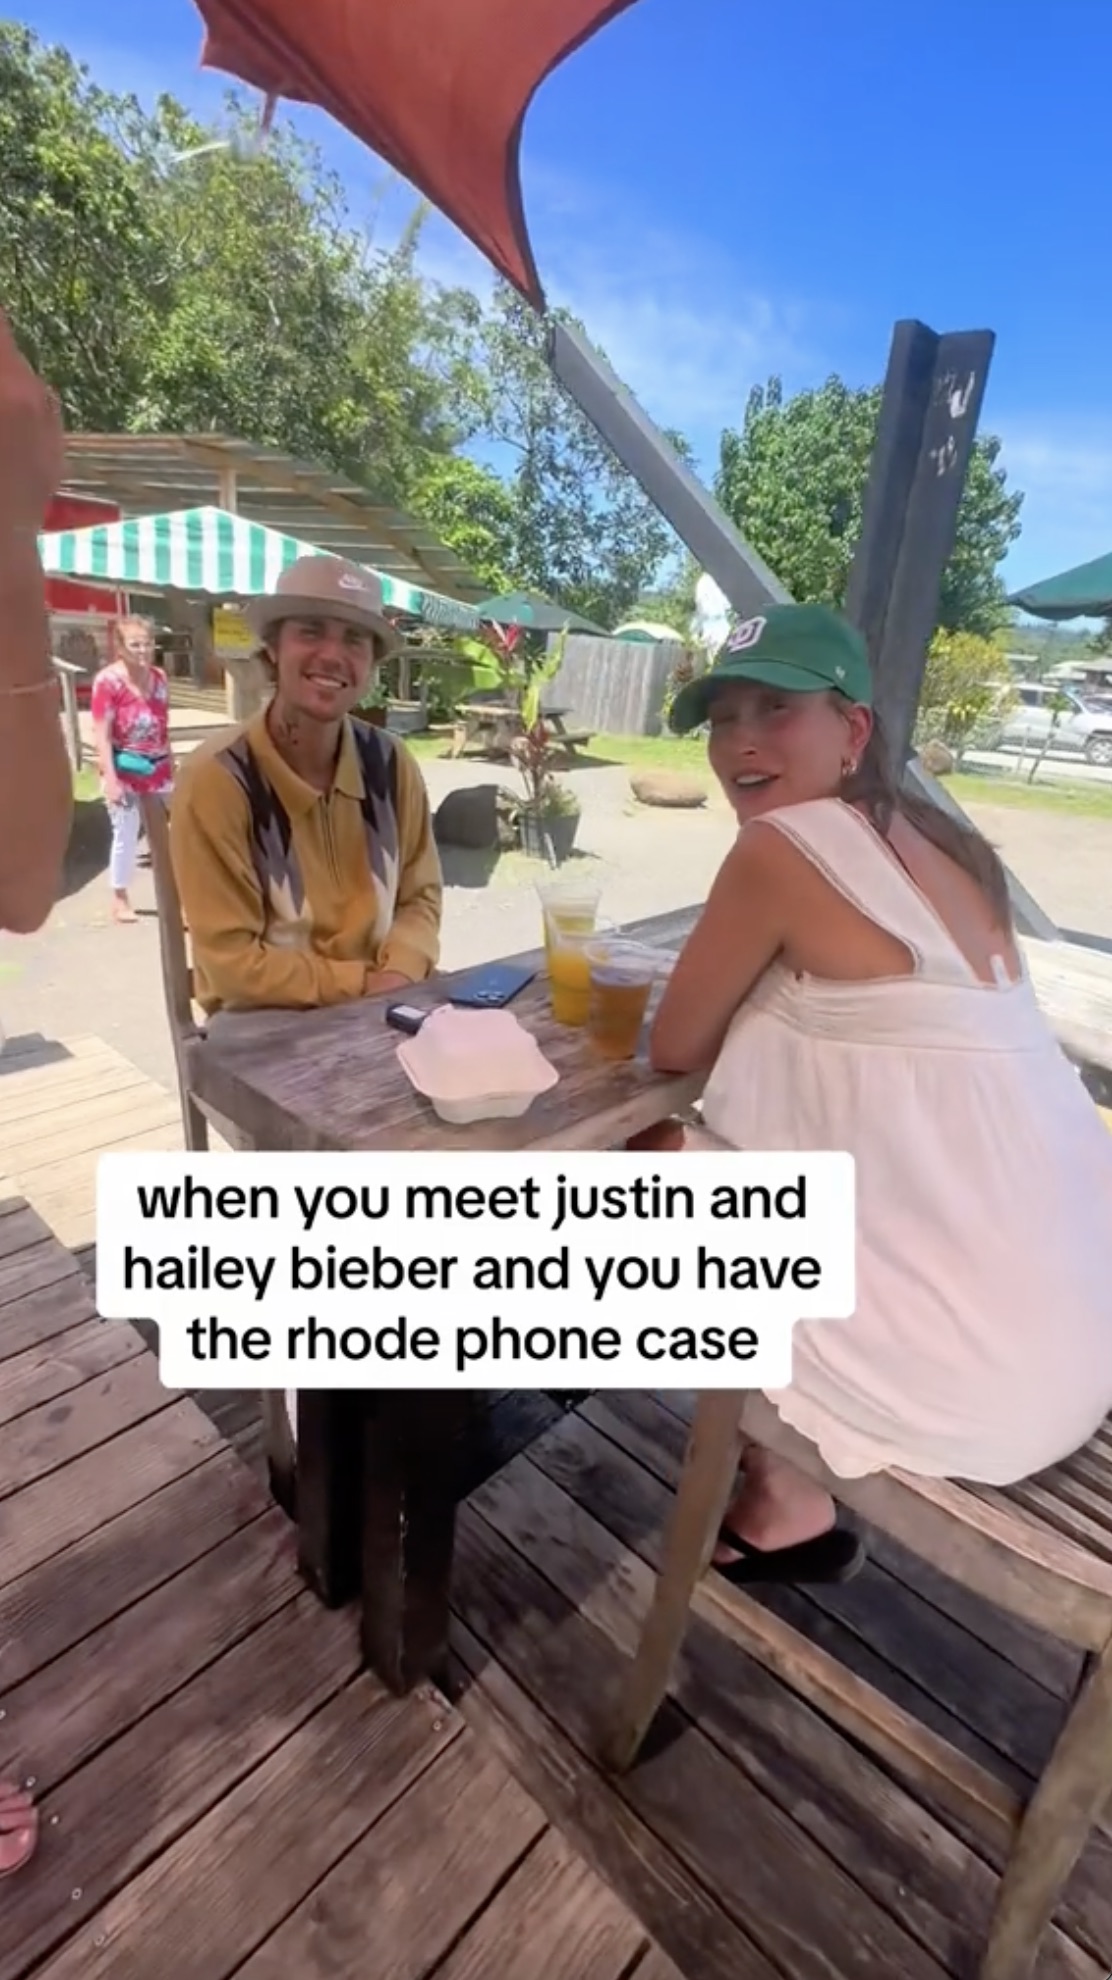 Another TikTok video had some fans noting how happy the couple looked as they enjoyed lunch in Hawaii